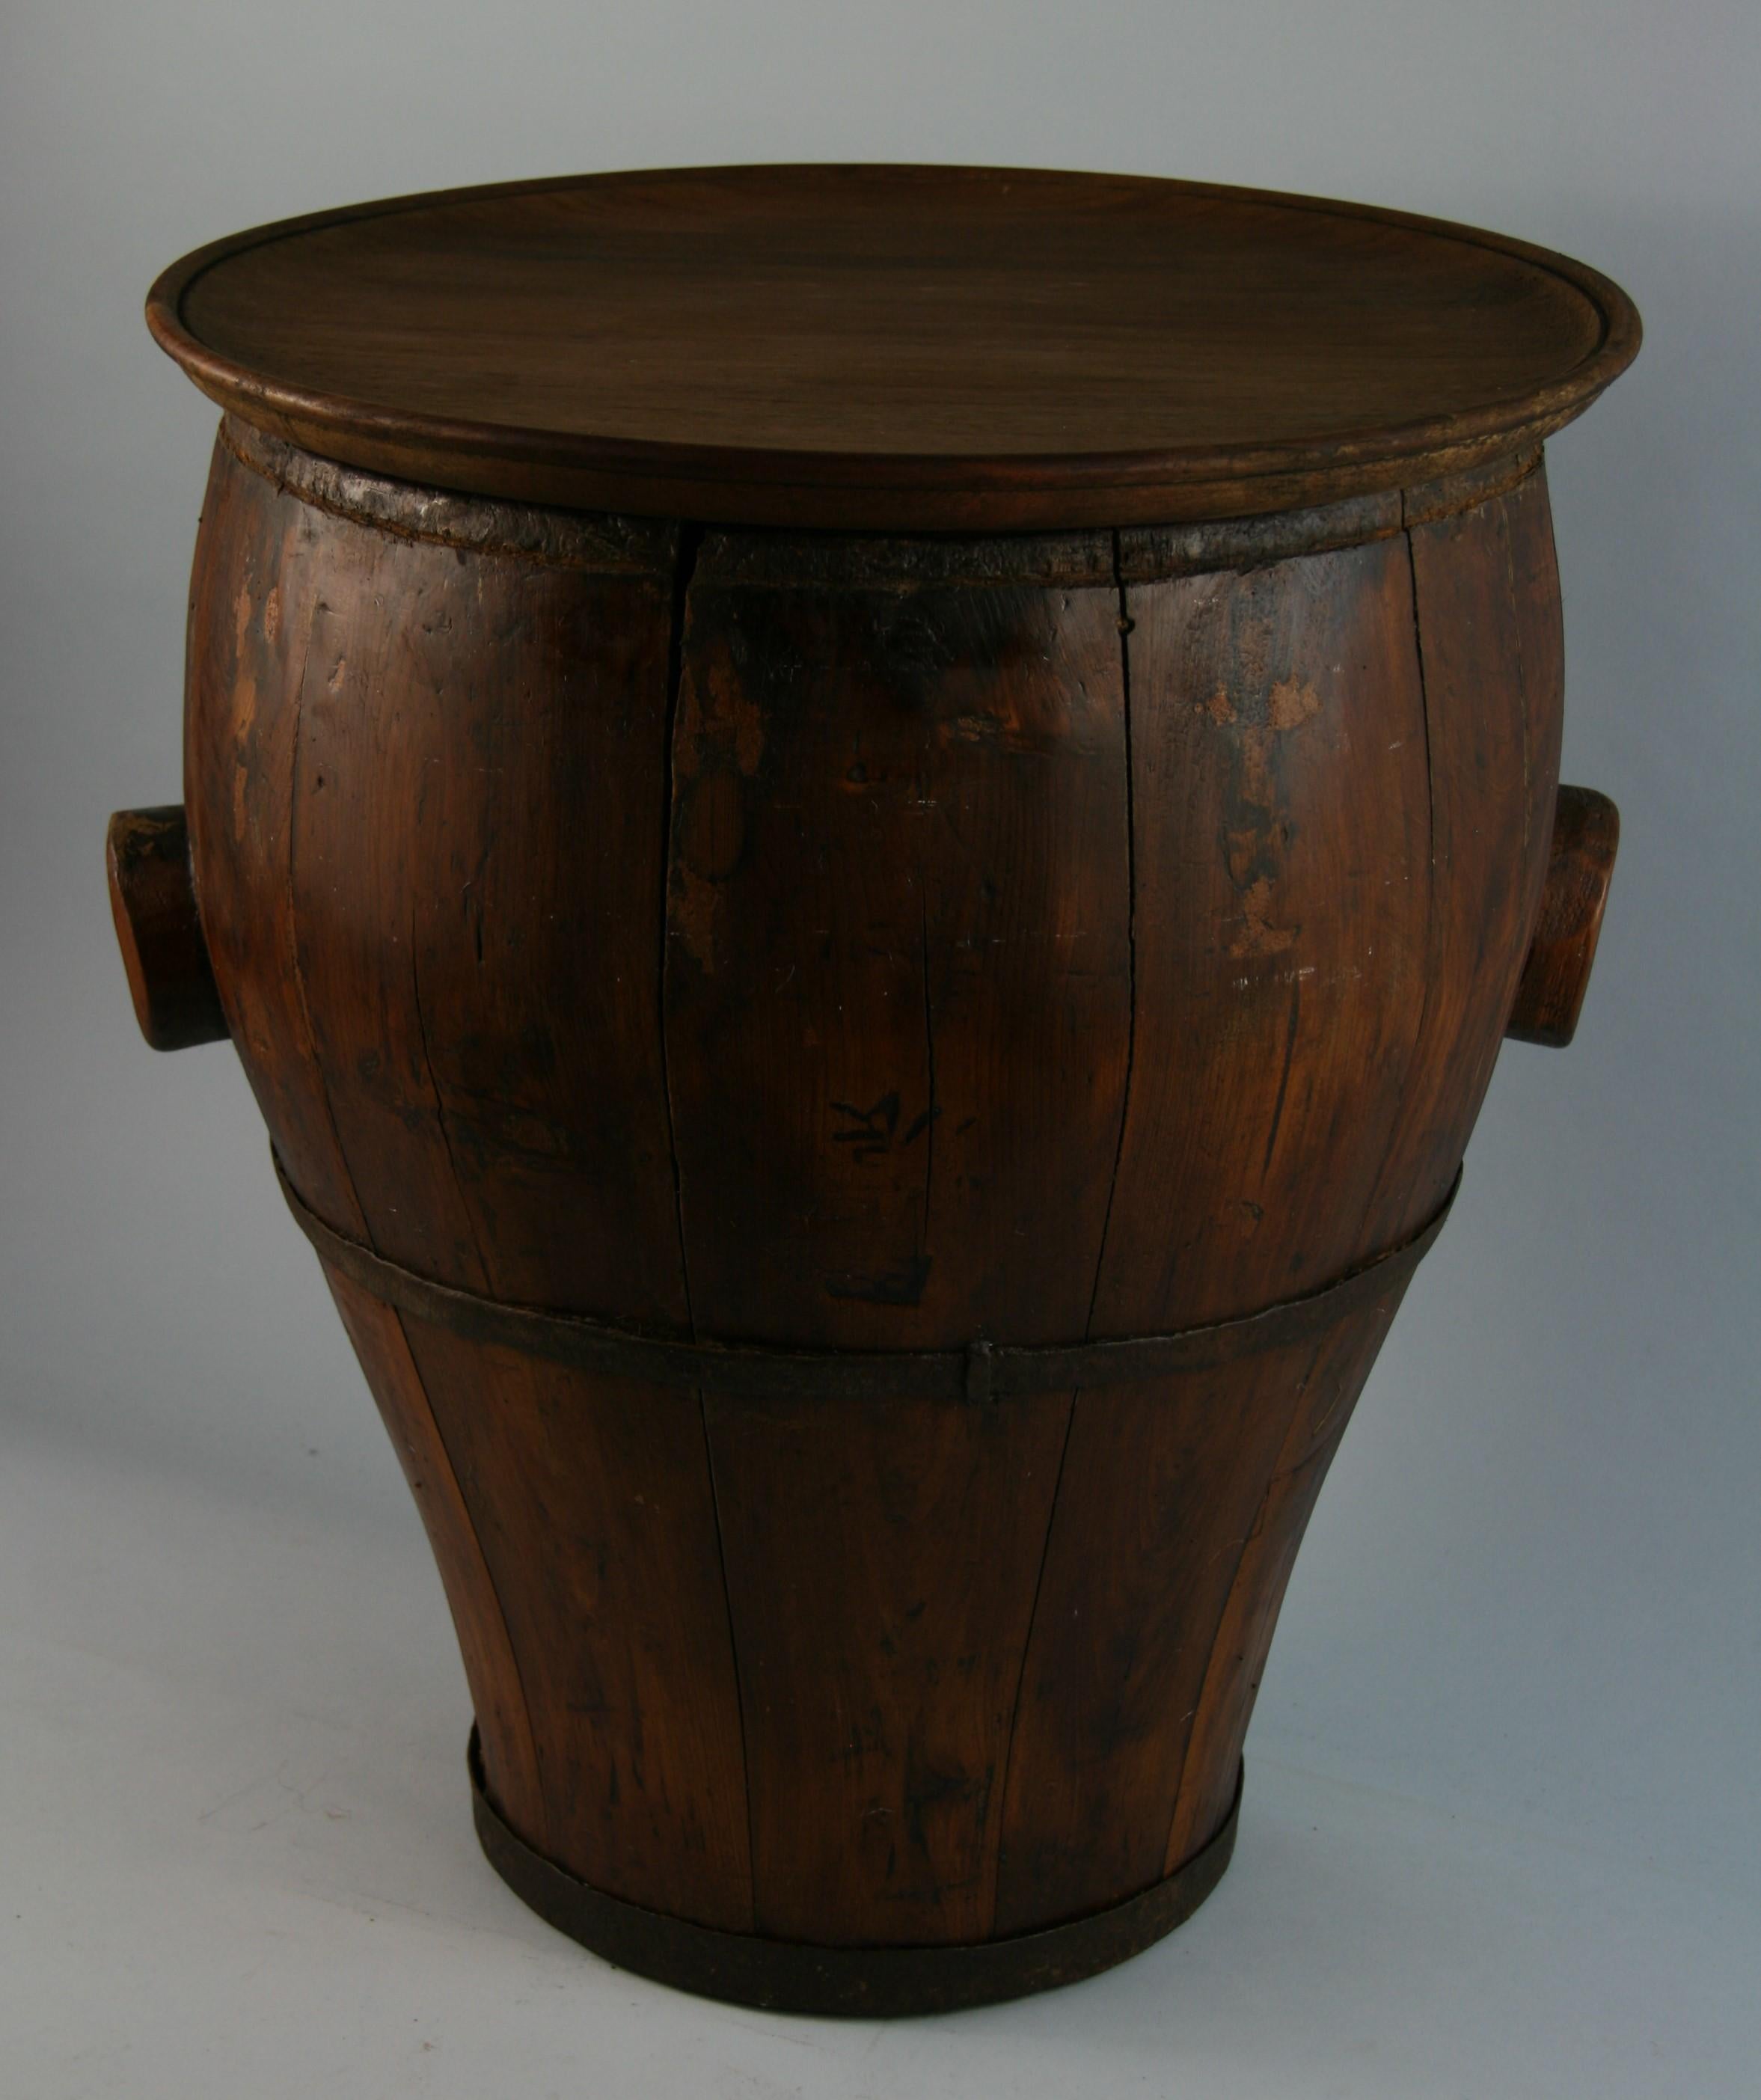 3-611 Chinese  rice  storage barrel converted into side table/drink table.